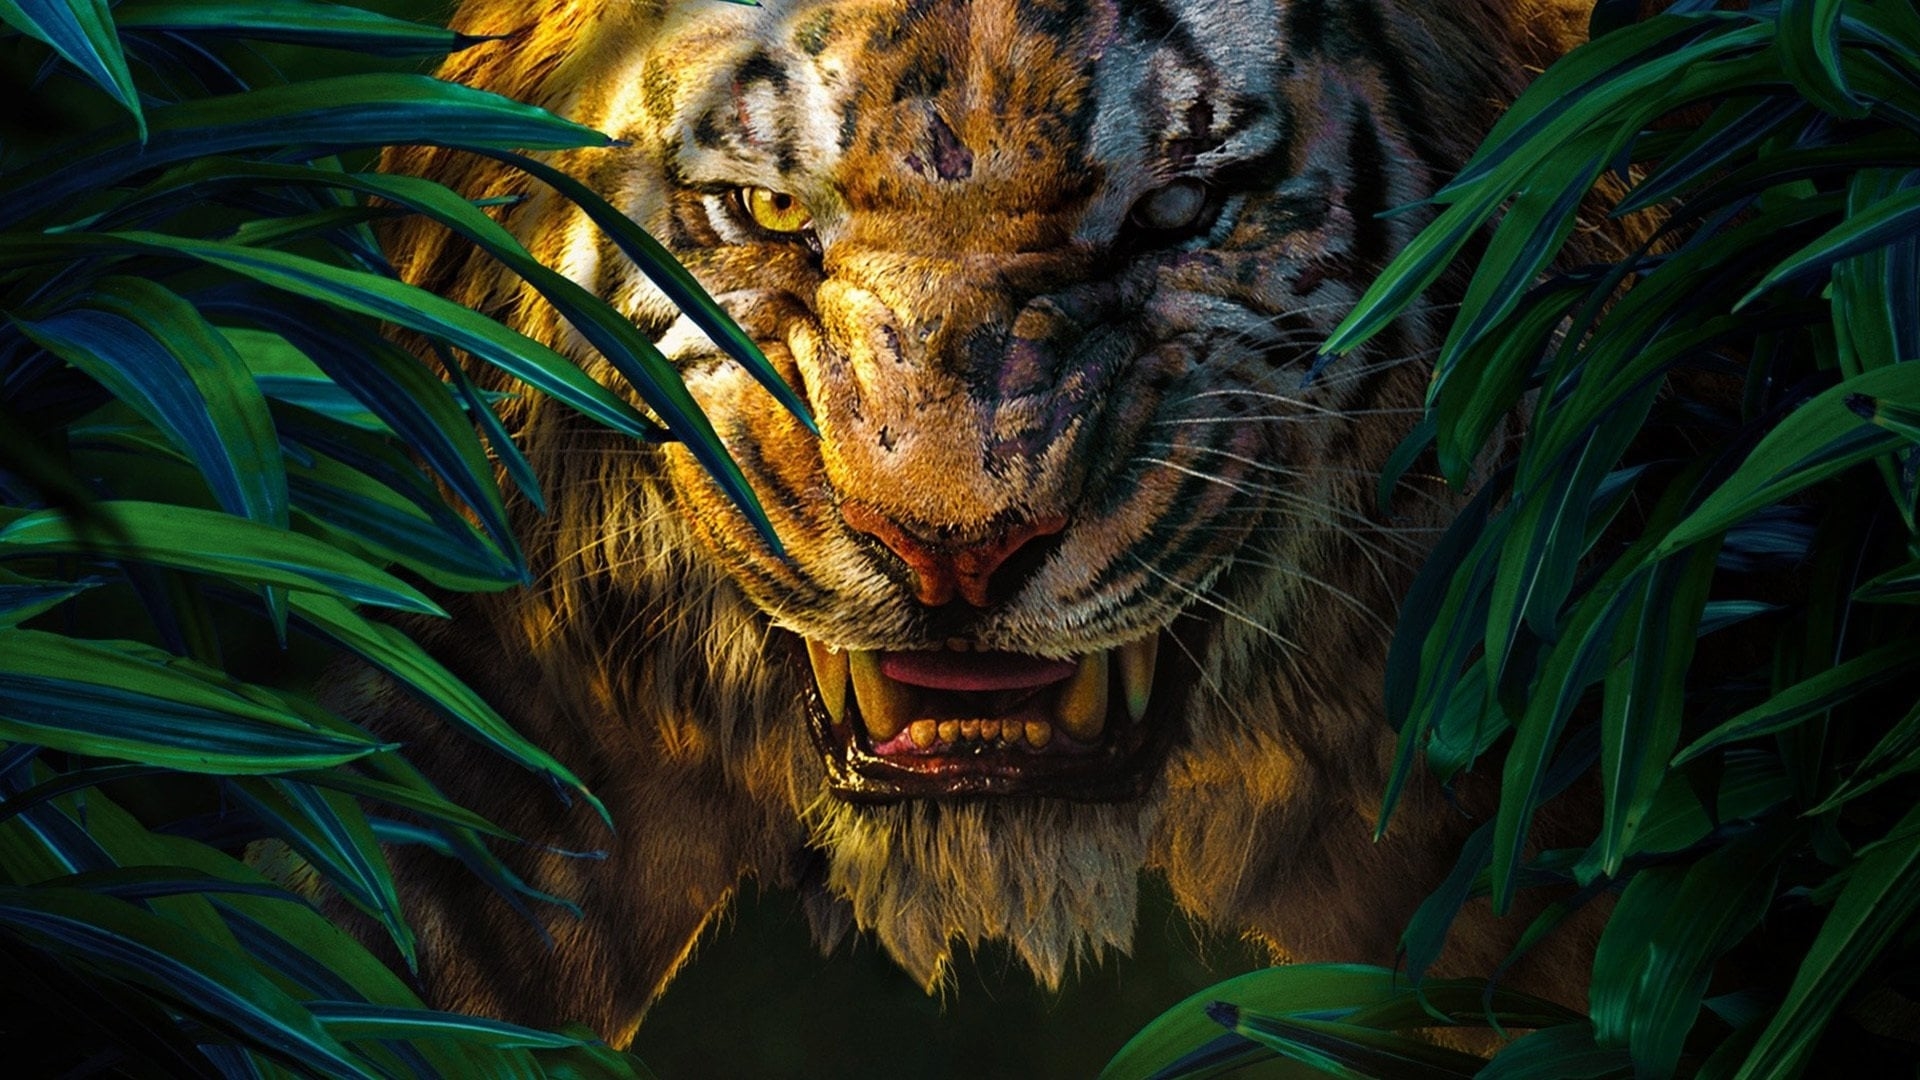 The Jungle Book Shere Khan Wallpaper, HD Movies 4K Wallpapers, Images